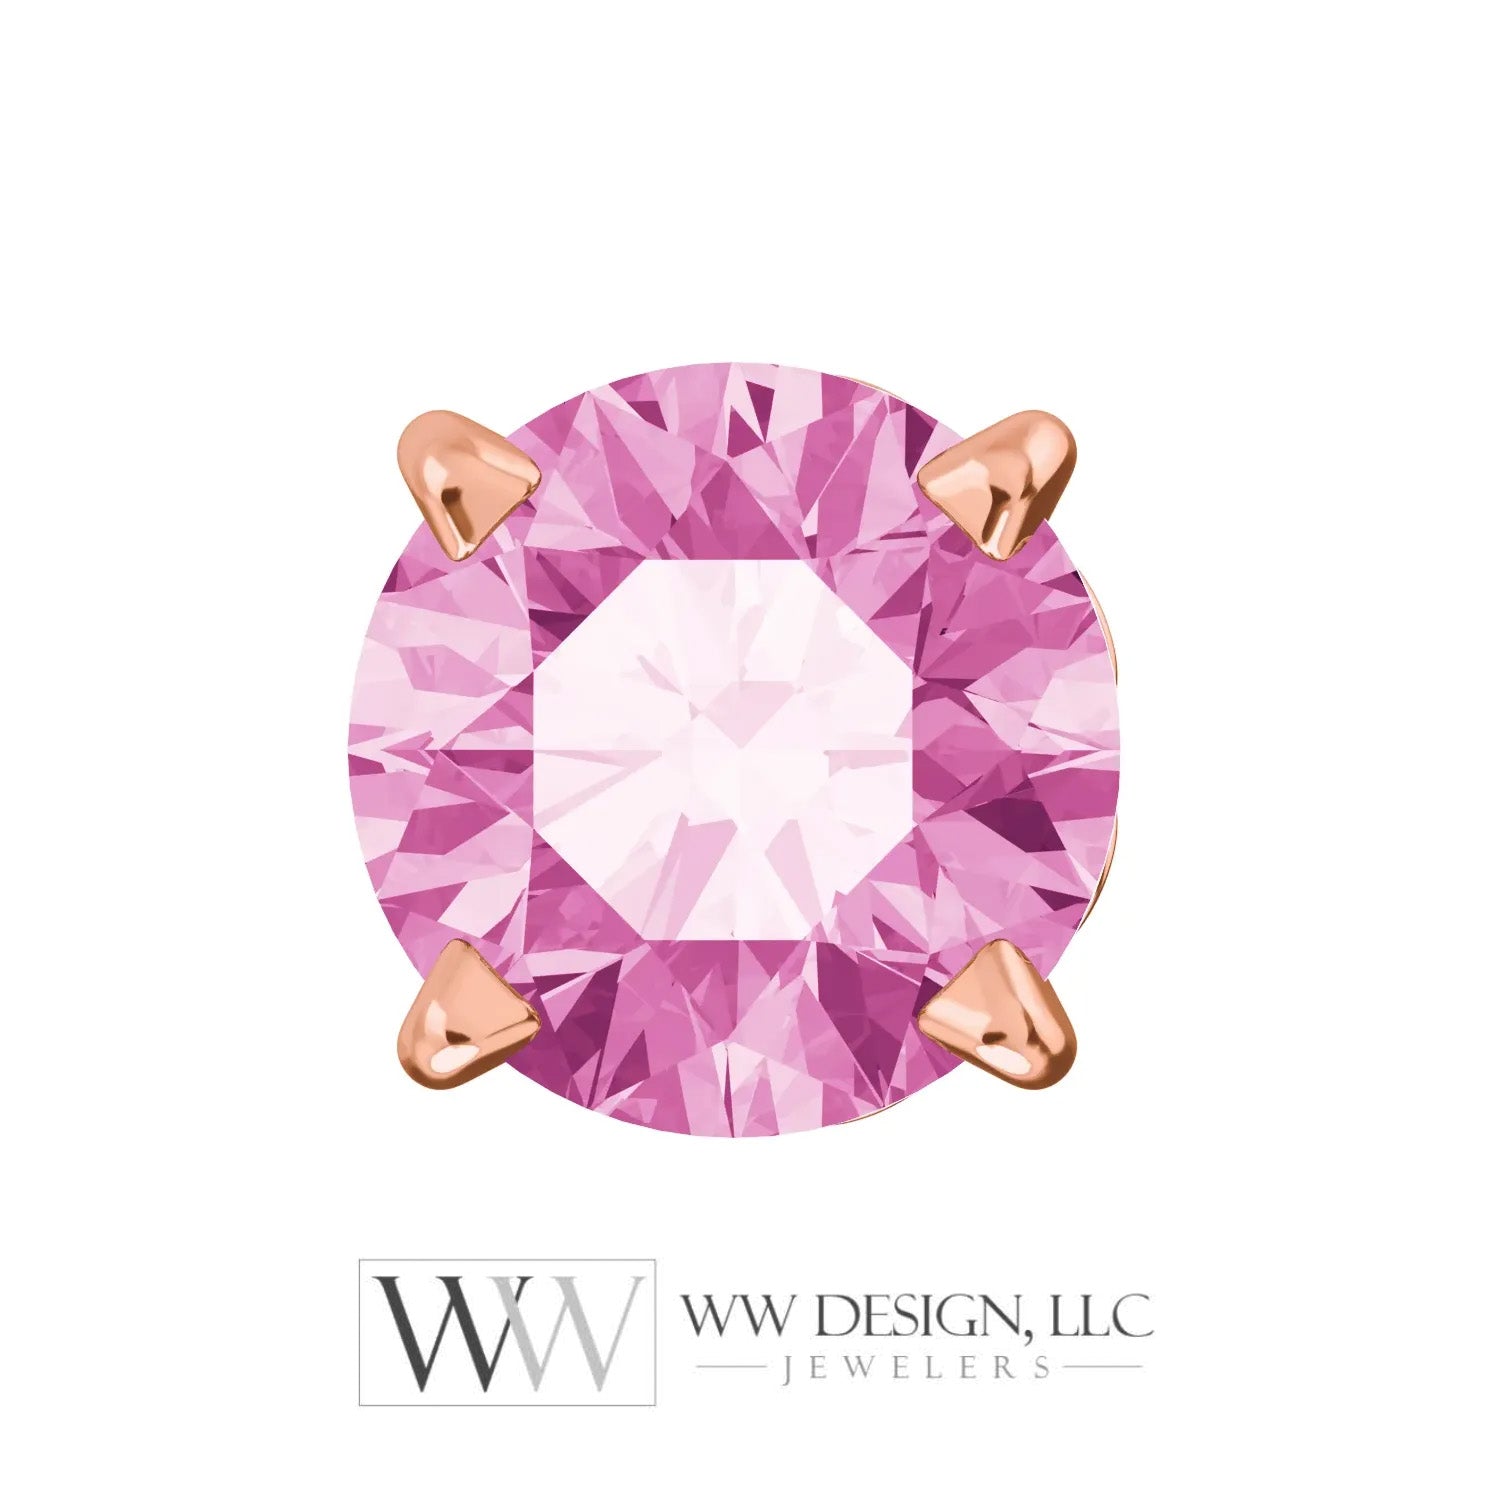 Genuine AAA Pink Sapphire Earring Studs 5mm 1.32 tcw (each 0.66cts) Post w/ 14k Solid Gold (Yellow, Rose, White)Silver, Platinum Studs - WWDesignJewelers.com